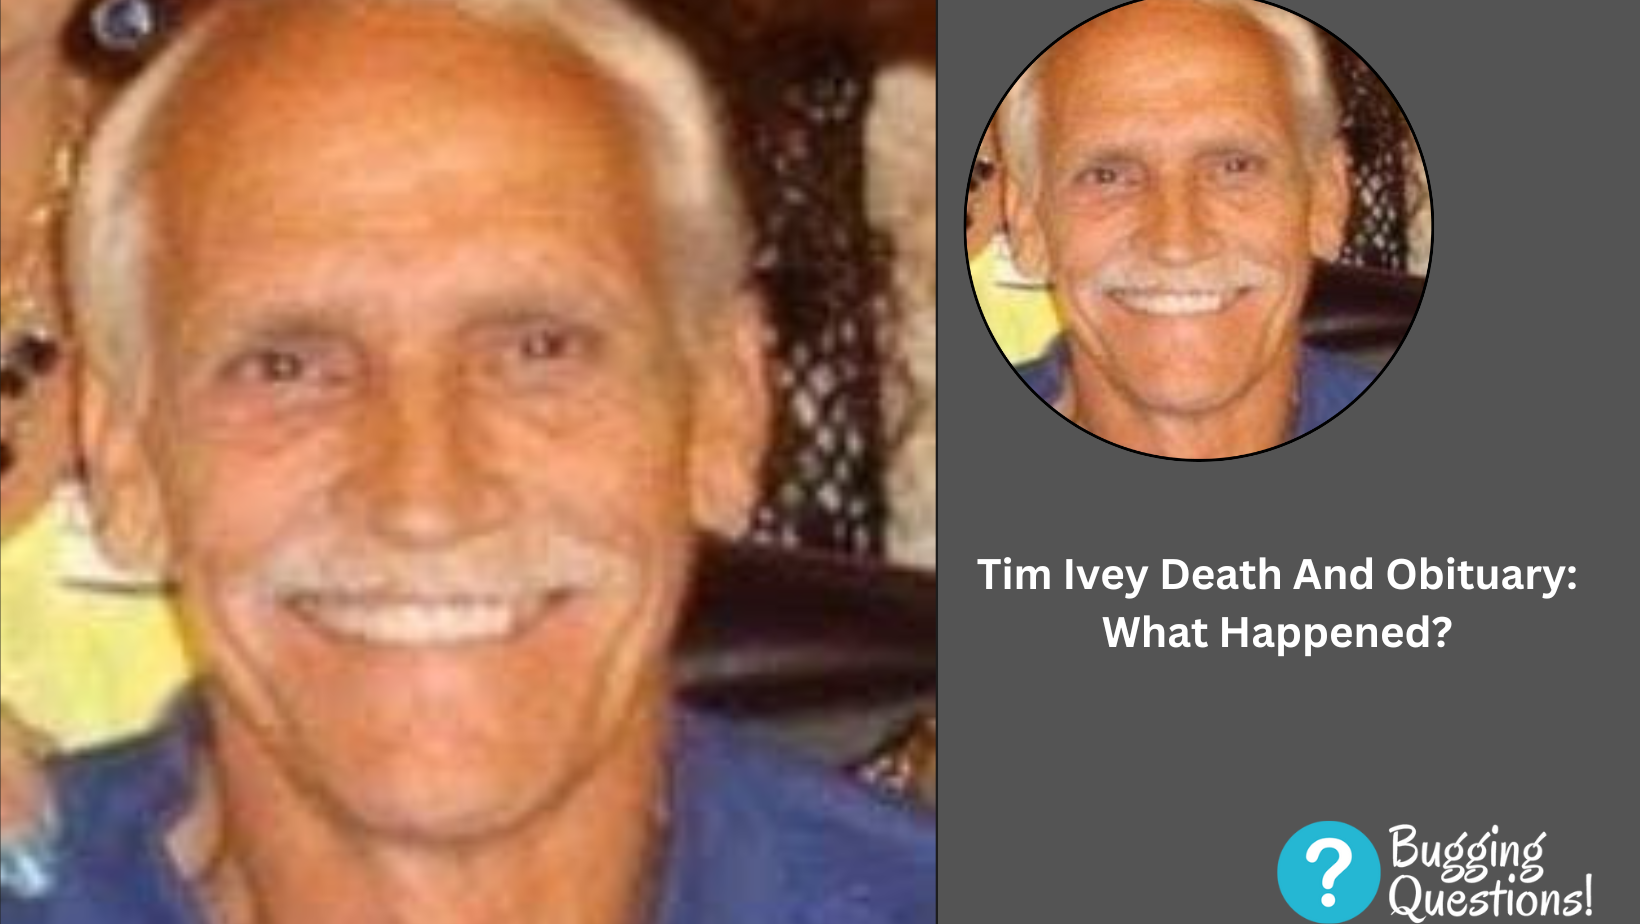 Tim Ivey Death And Obituary: What Happened?